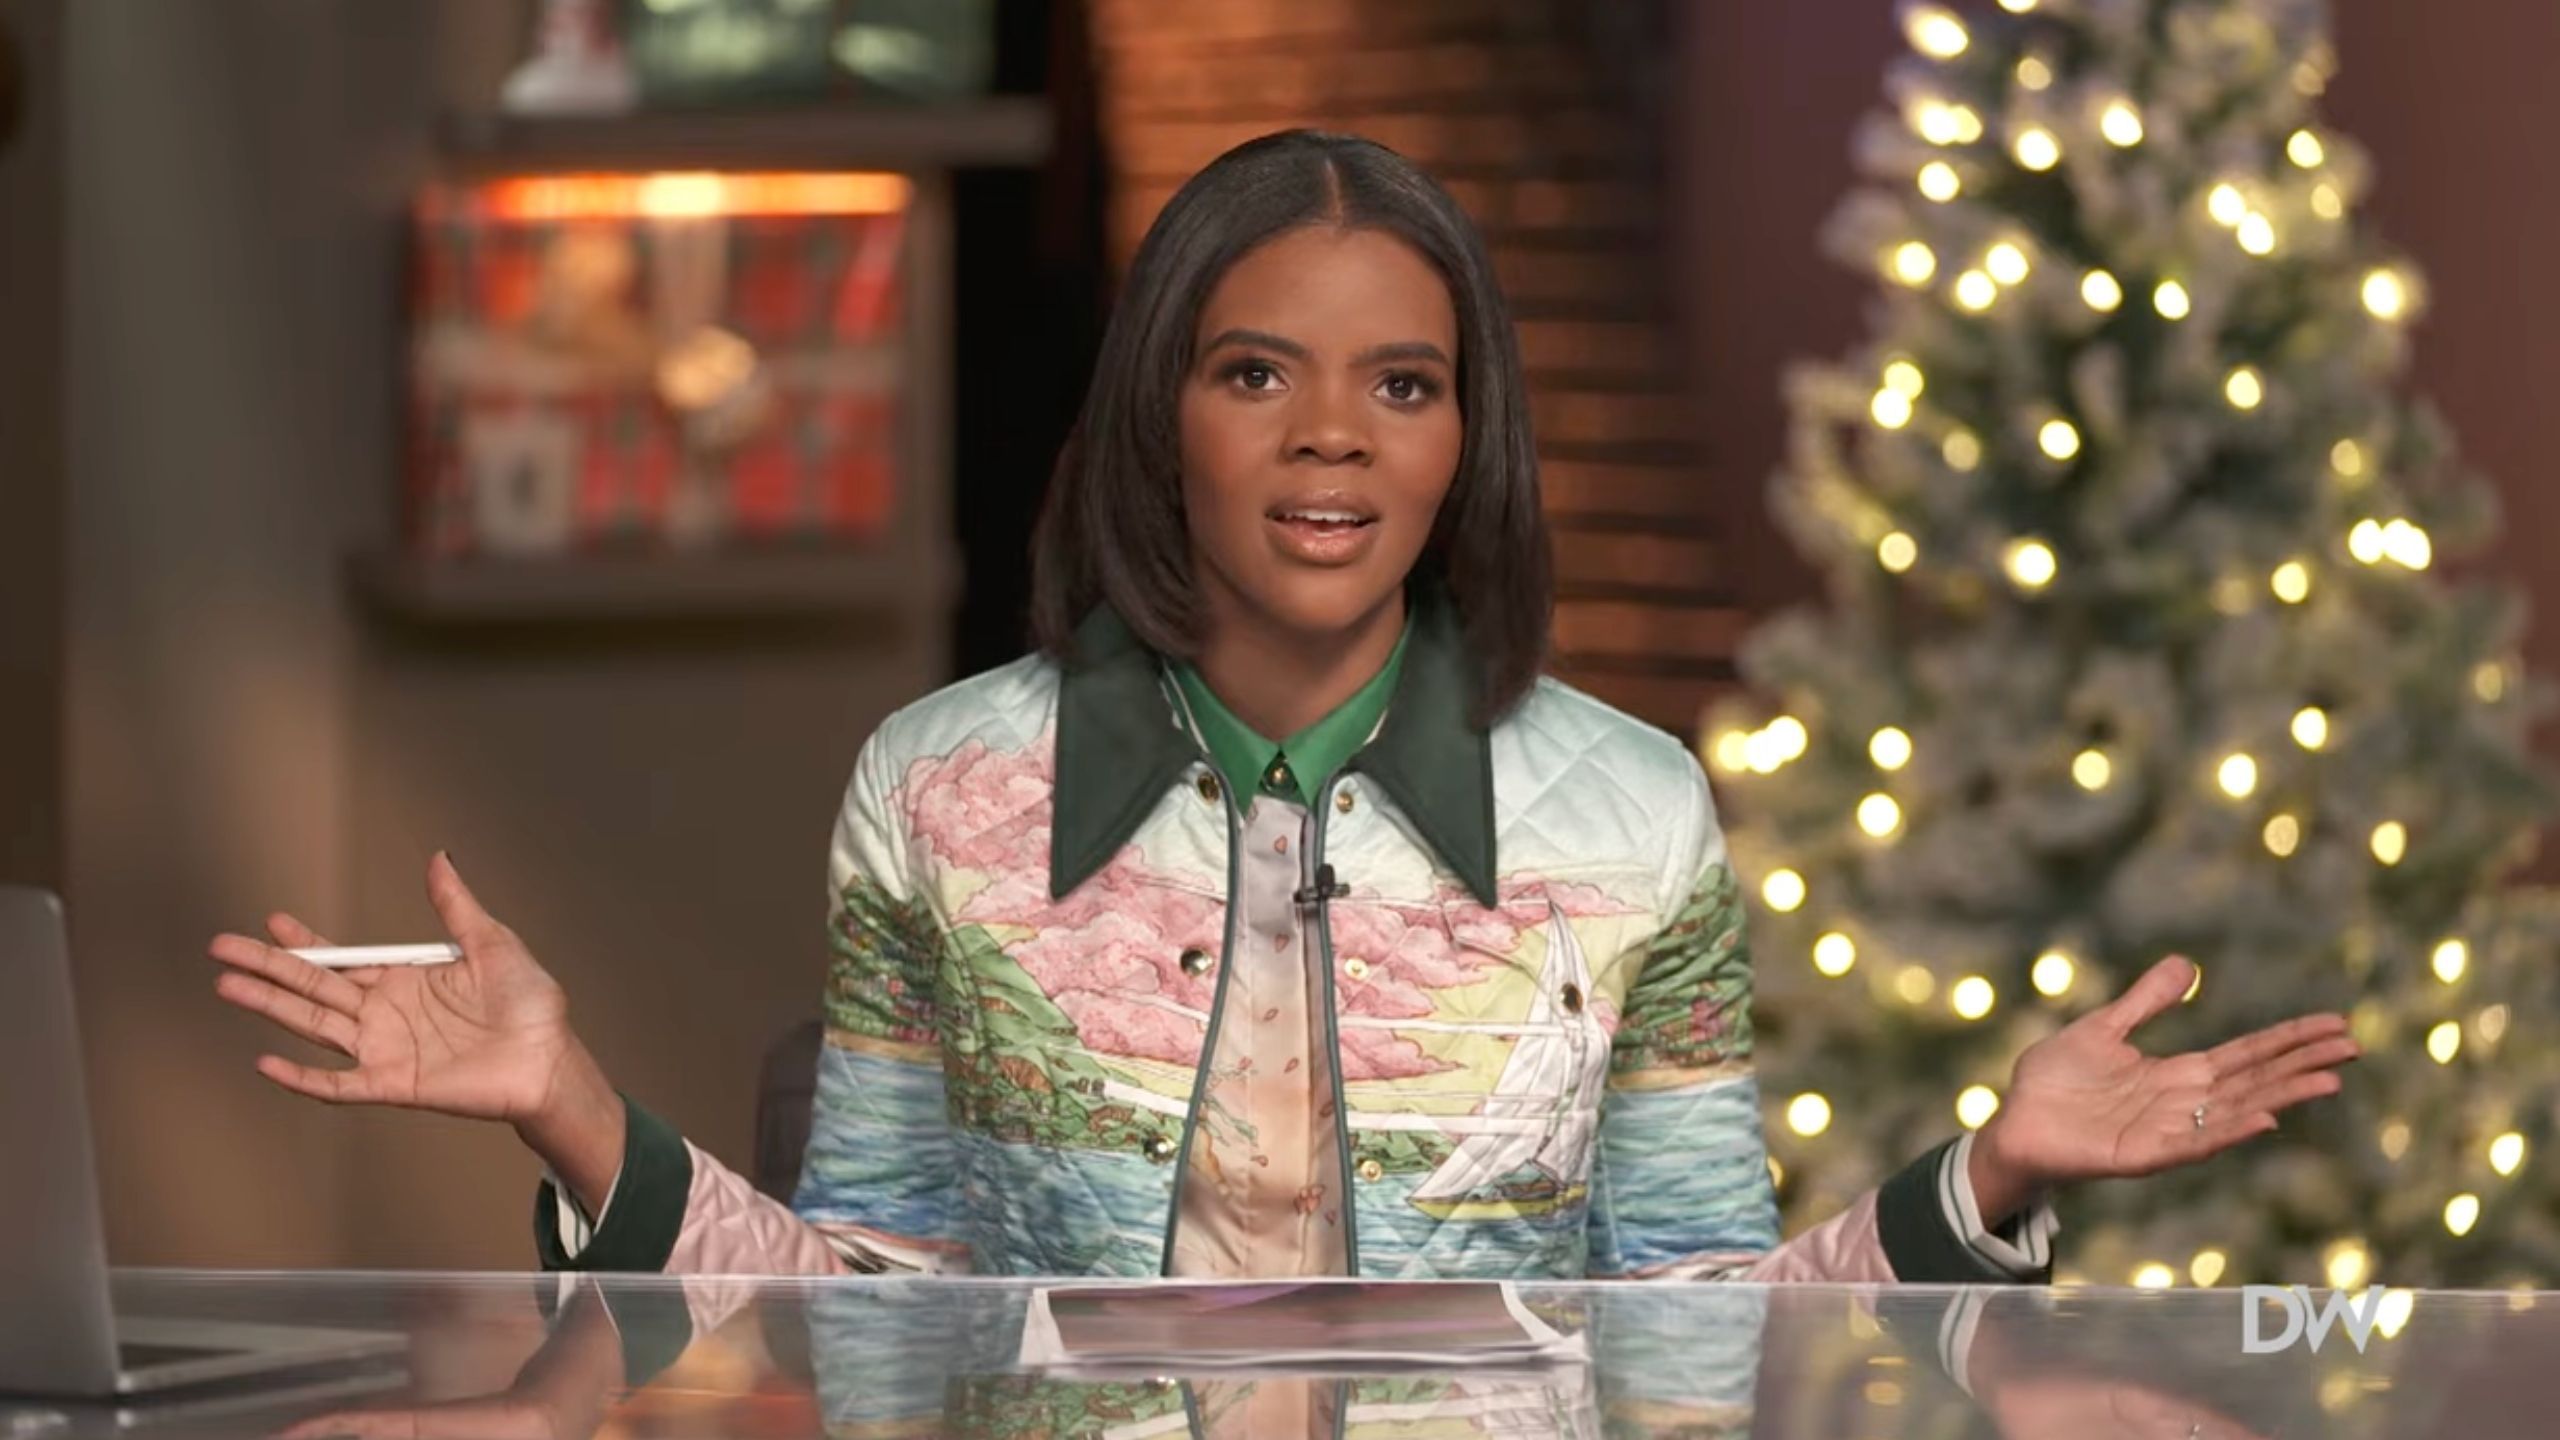 Candace Owens talking with her hands